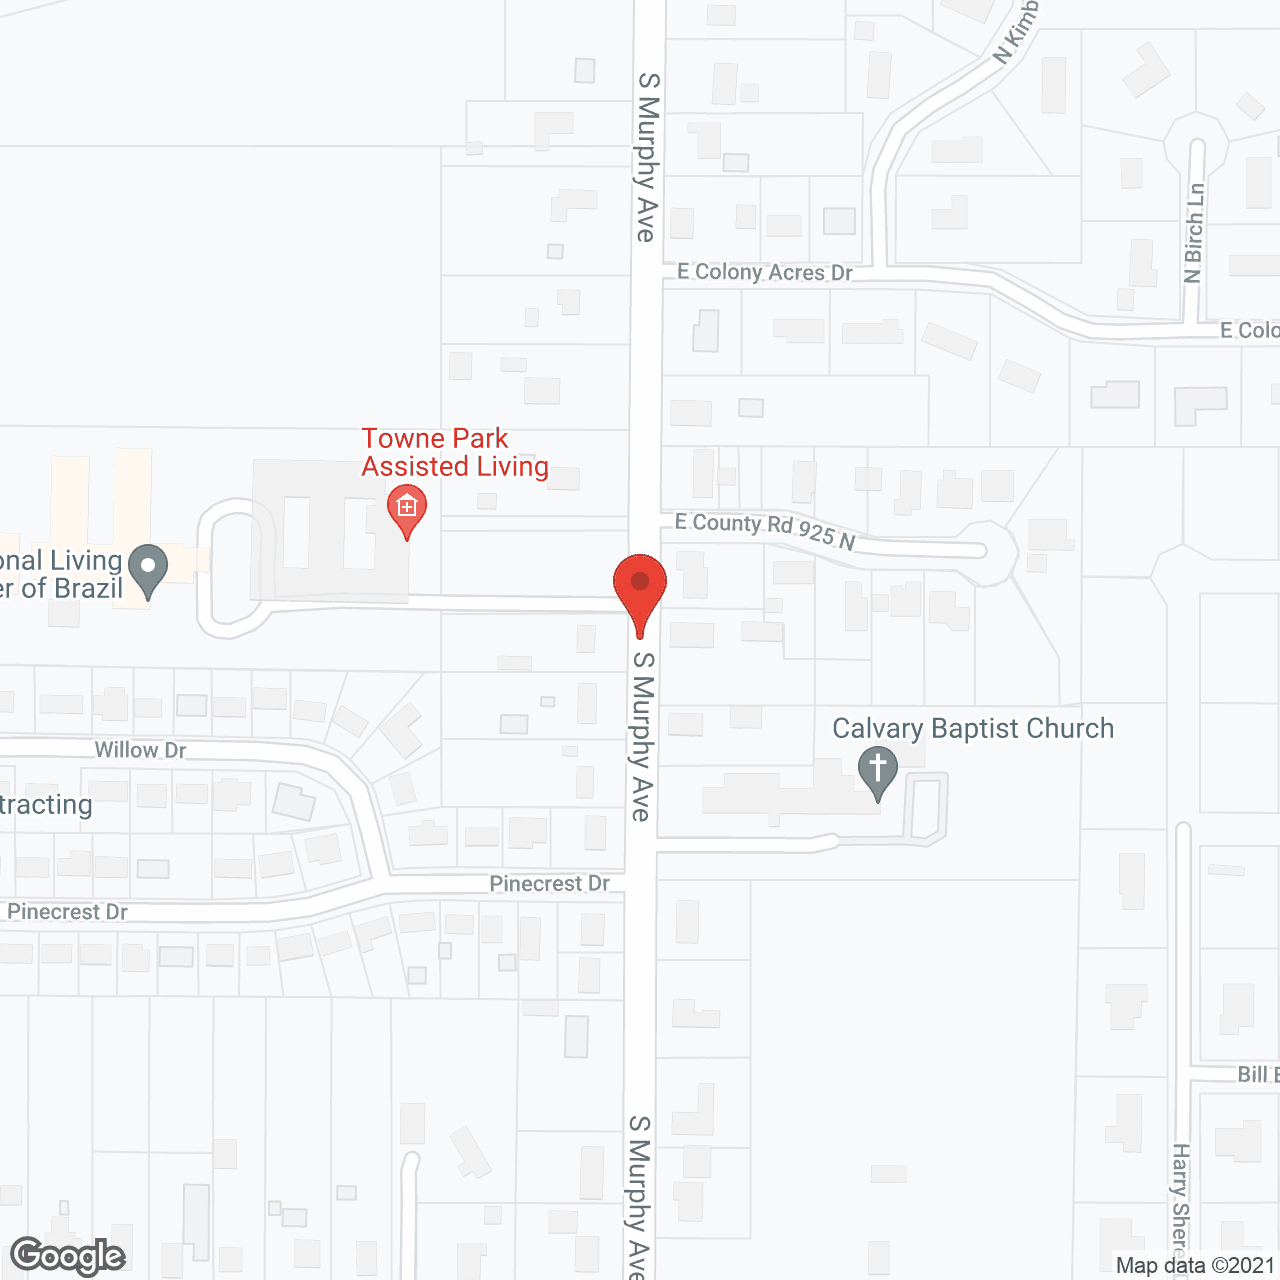 Towne Park Assisted Living in google map